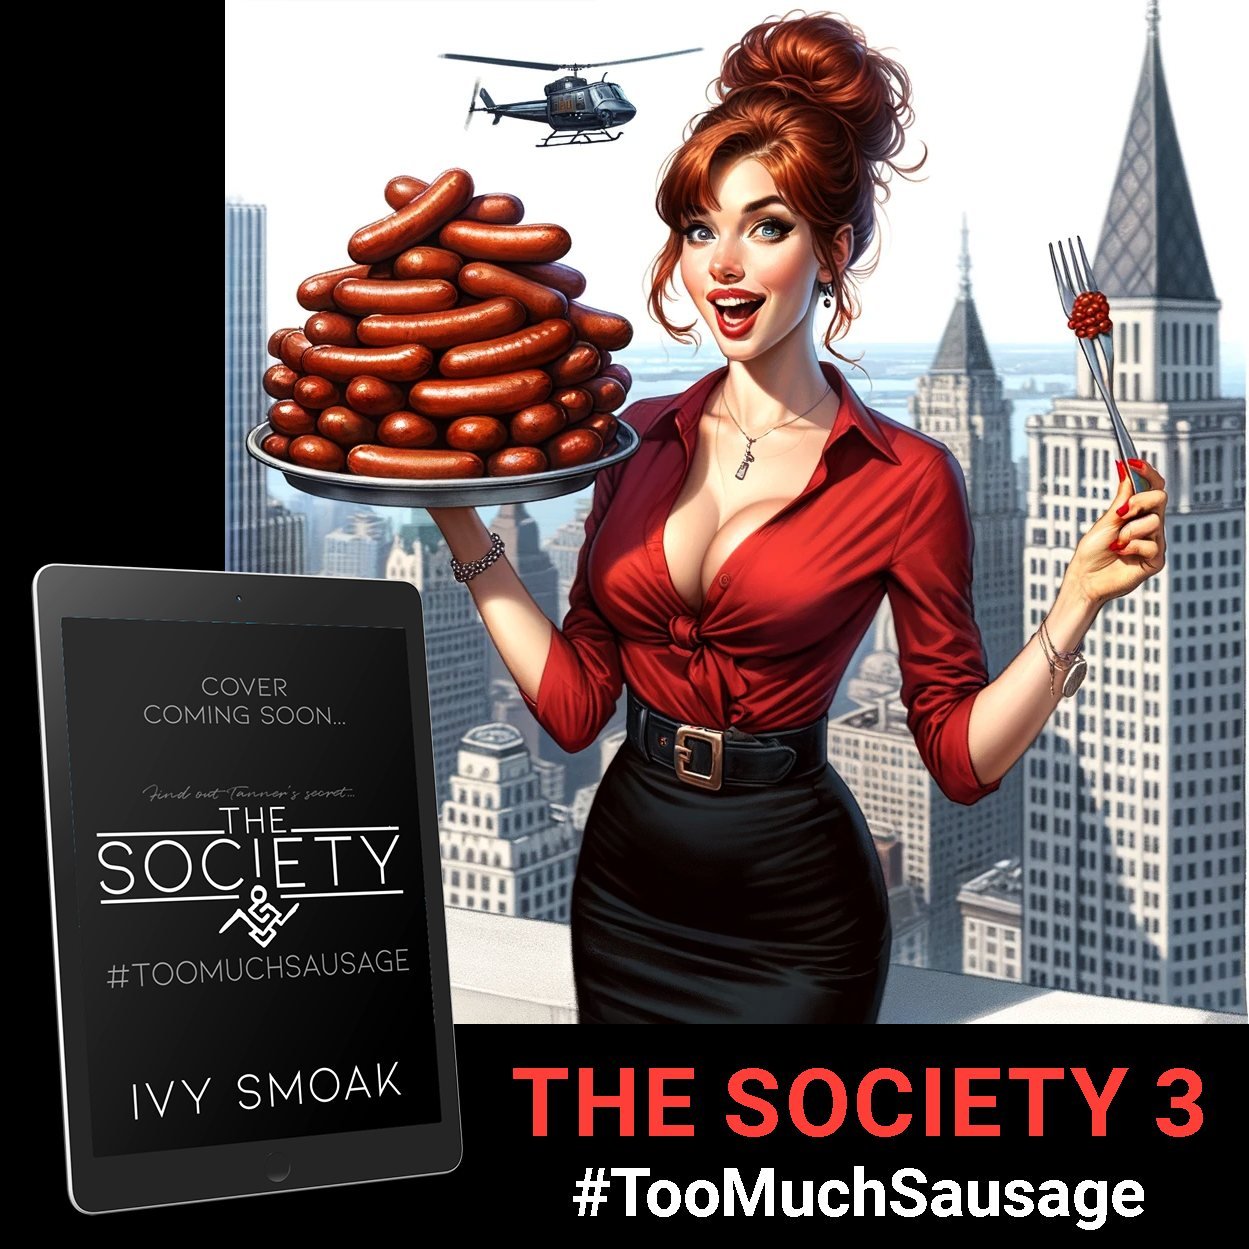 And the winner is...

The Society #TooMuchSausage

You guys had some great guesses and a few of you even guessed it right, but the first to get it right was Vee Richards. Vee: If you aren't already part of the ARC team, please send me a message and I